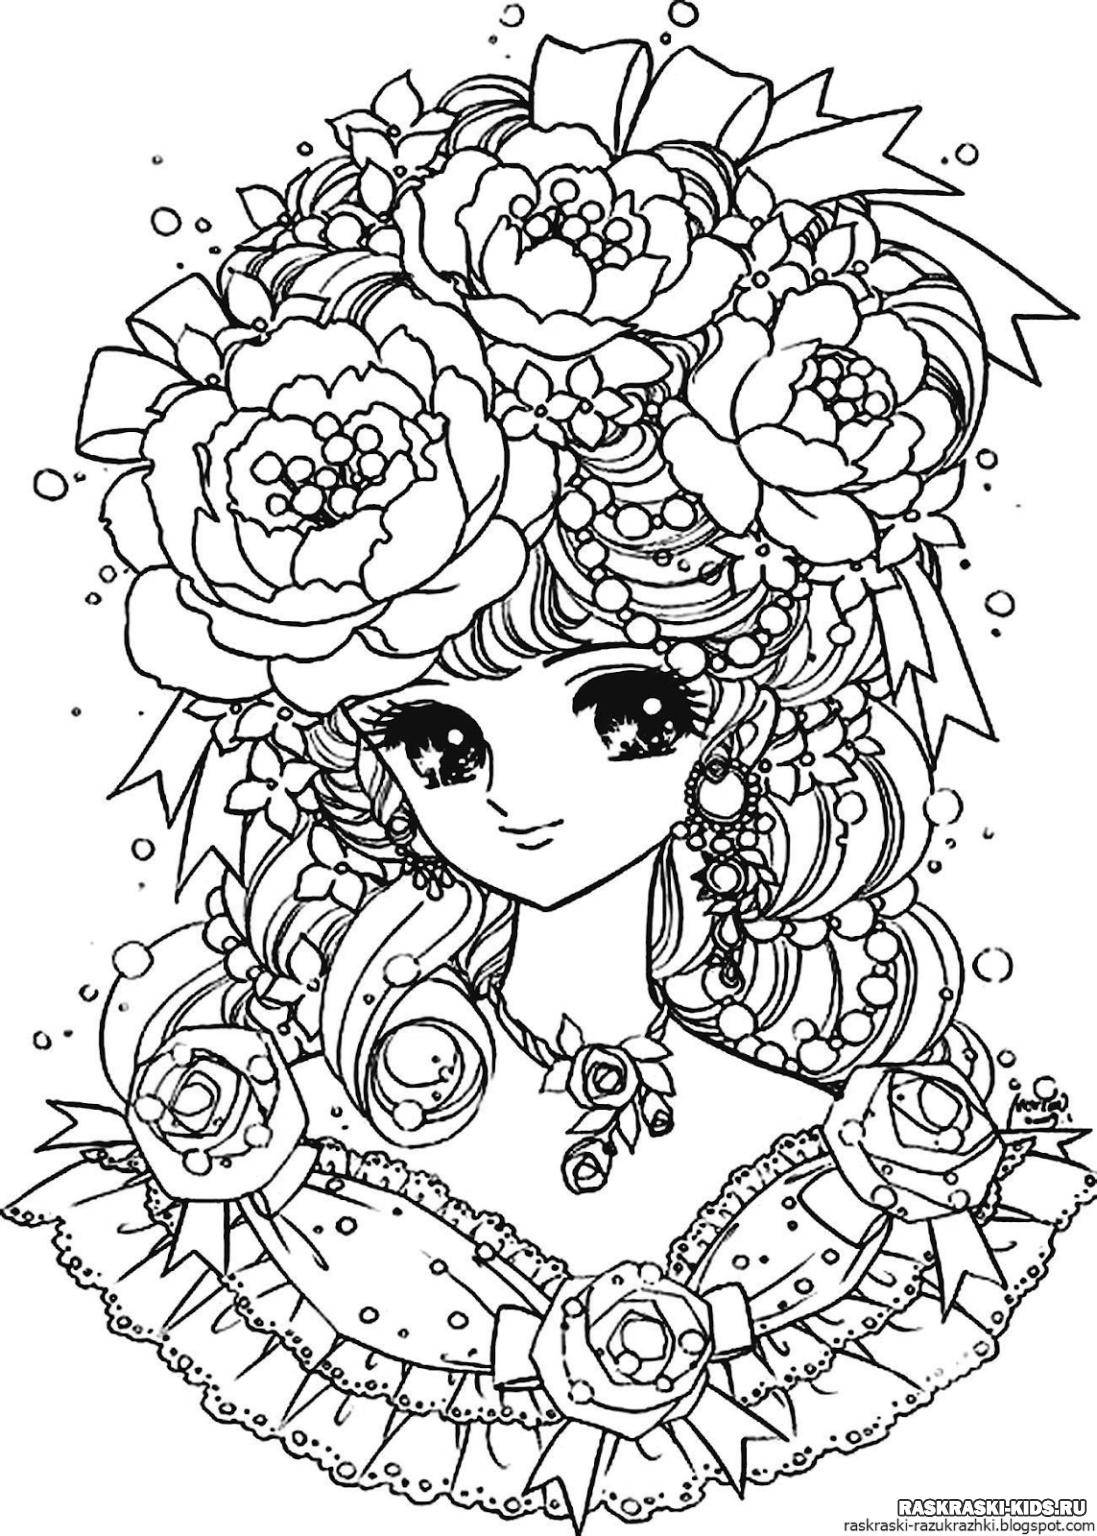 Fun coloring for girls 9-10 years old